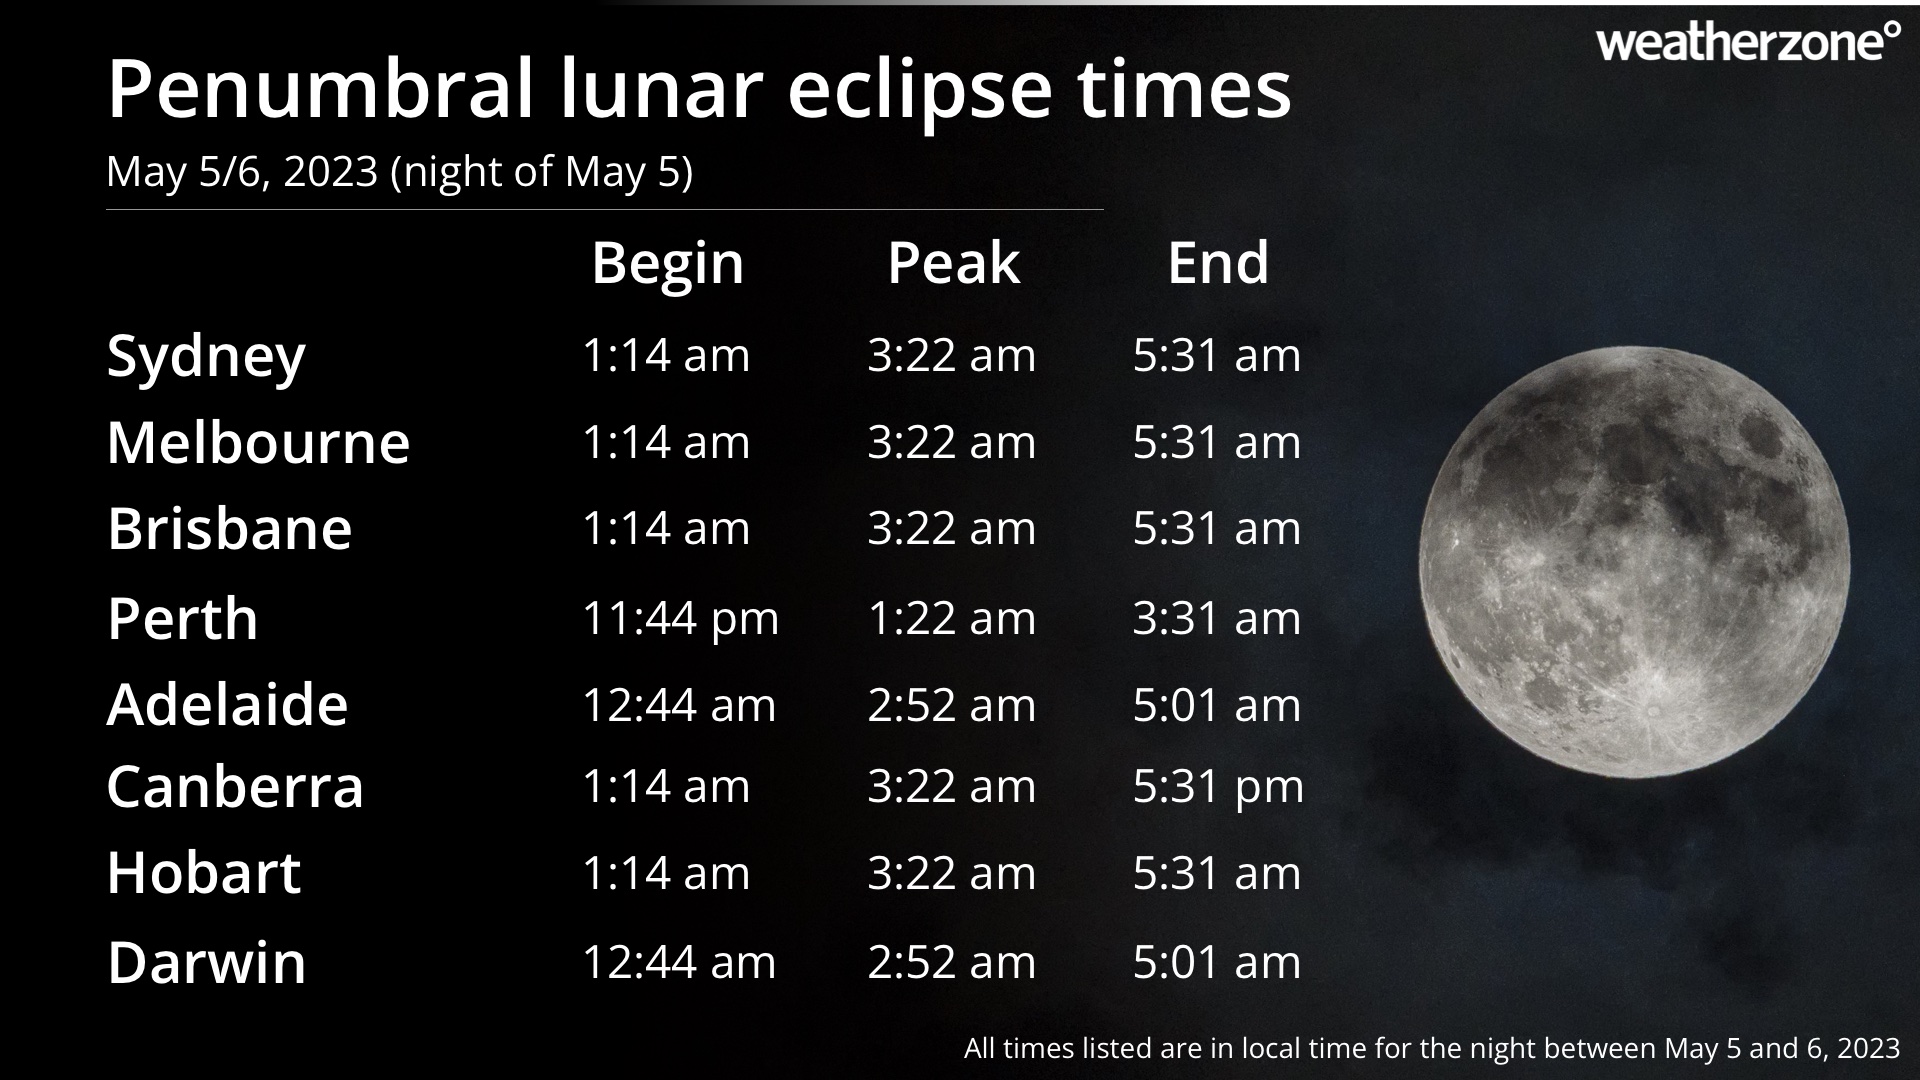 Star Wars Day followed by lunar eclipse and meteor shower